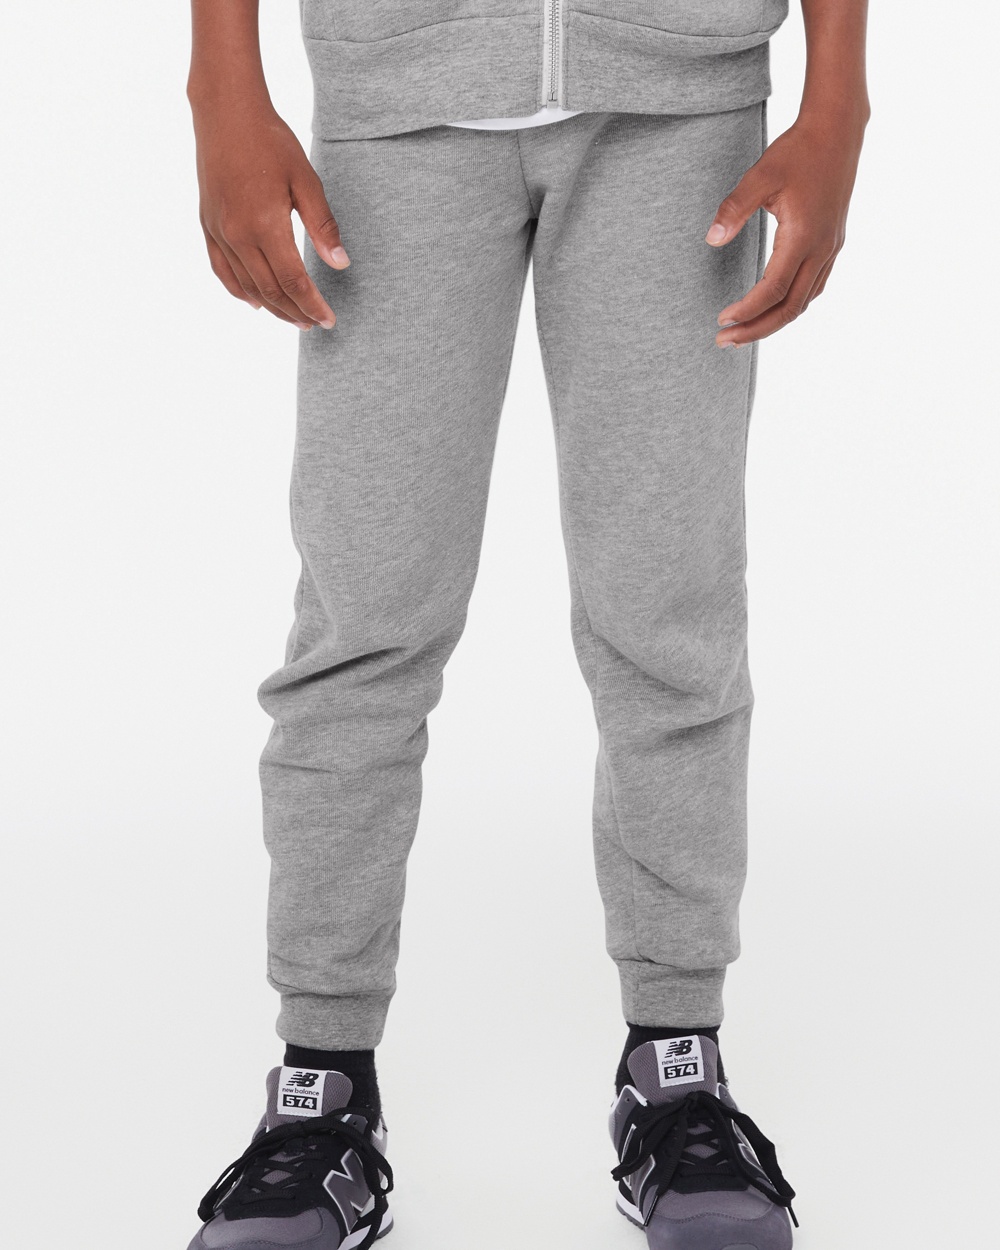 CV881 - Youth Jogger Sweatpants - One Stop